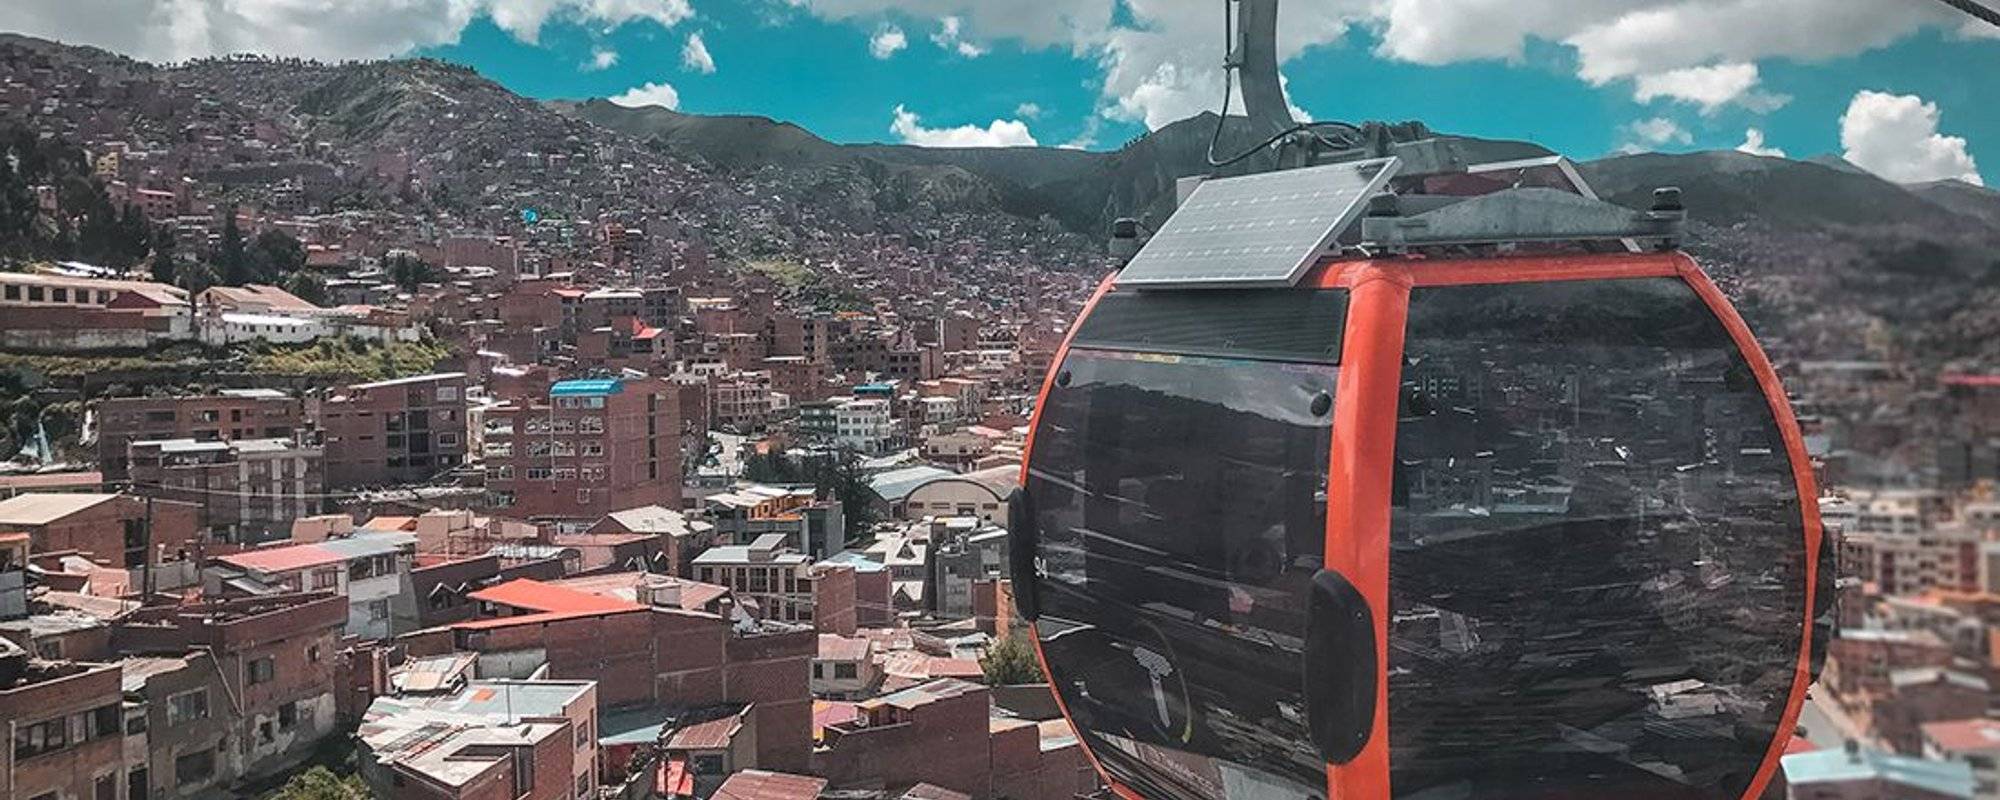 WELCOME TO LA PAZ - THE HIGHEST CAPITAL IN THE WORLD ! (part one)